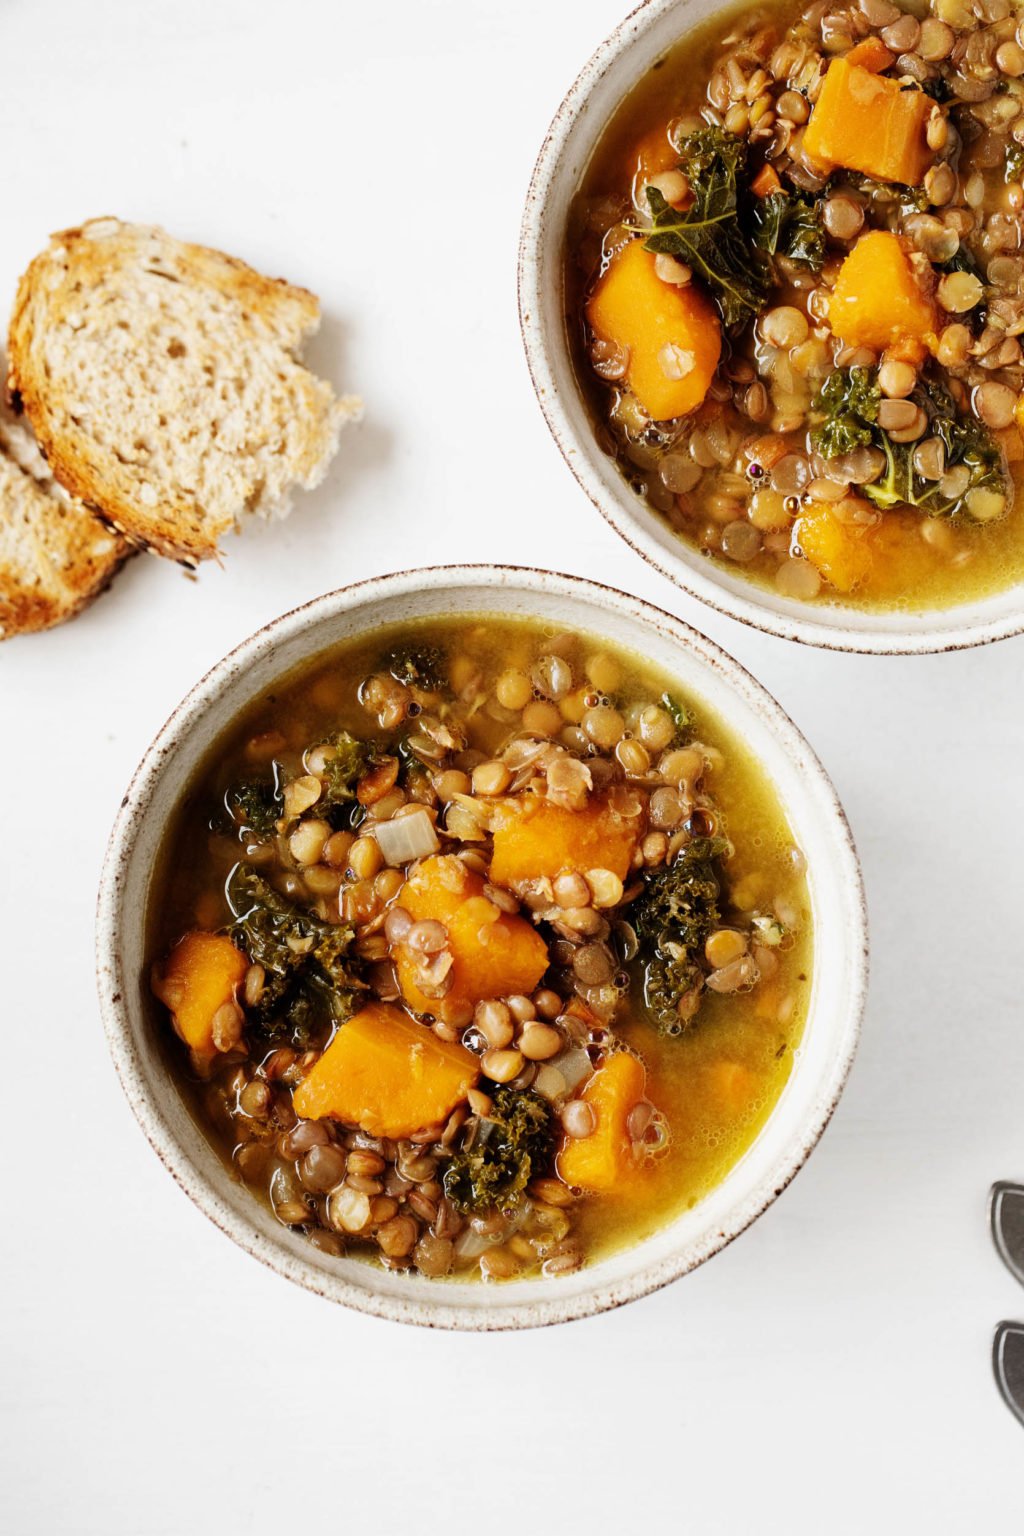 Two slices of toast accompany round, white ceramic bowls of a hearty, plant-based winter stew. They rest on a bright, white surface.